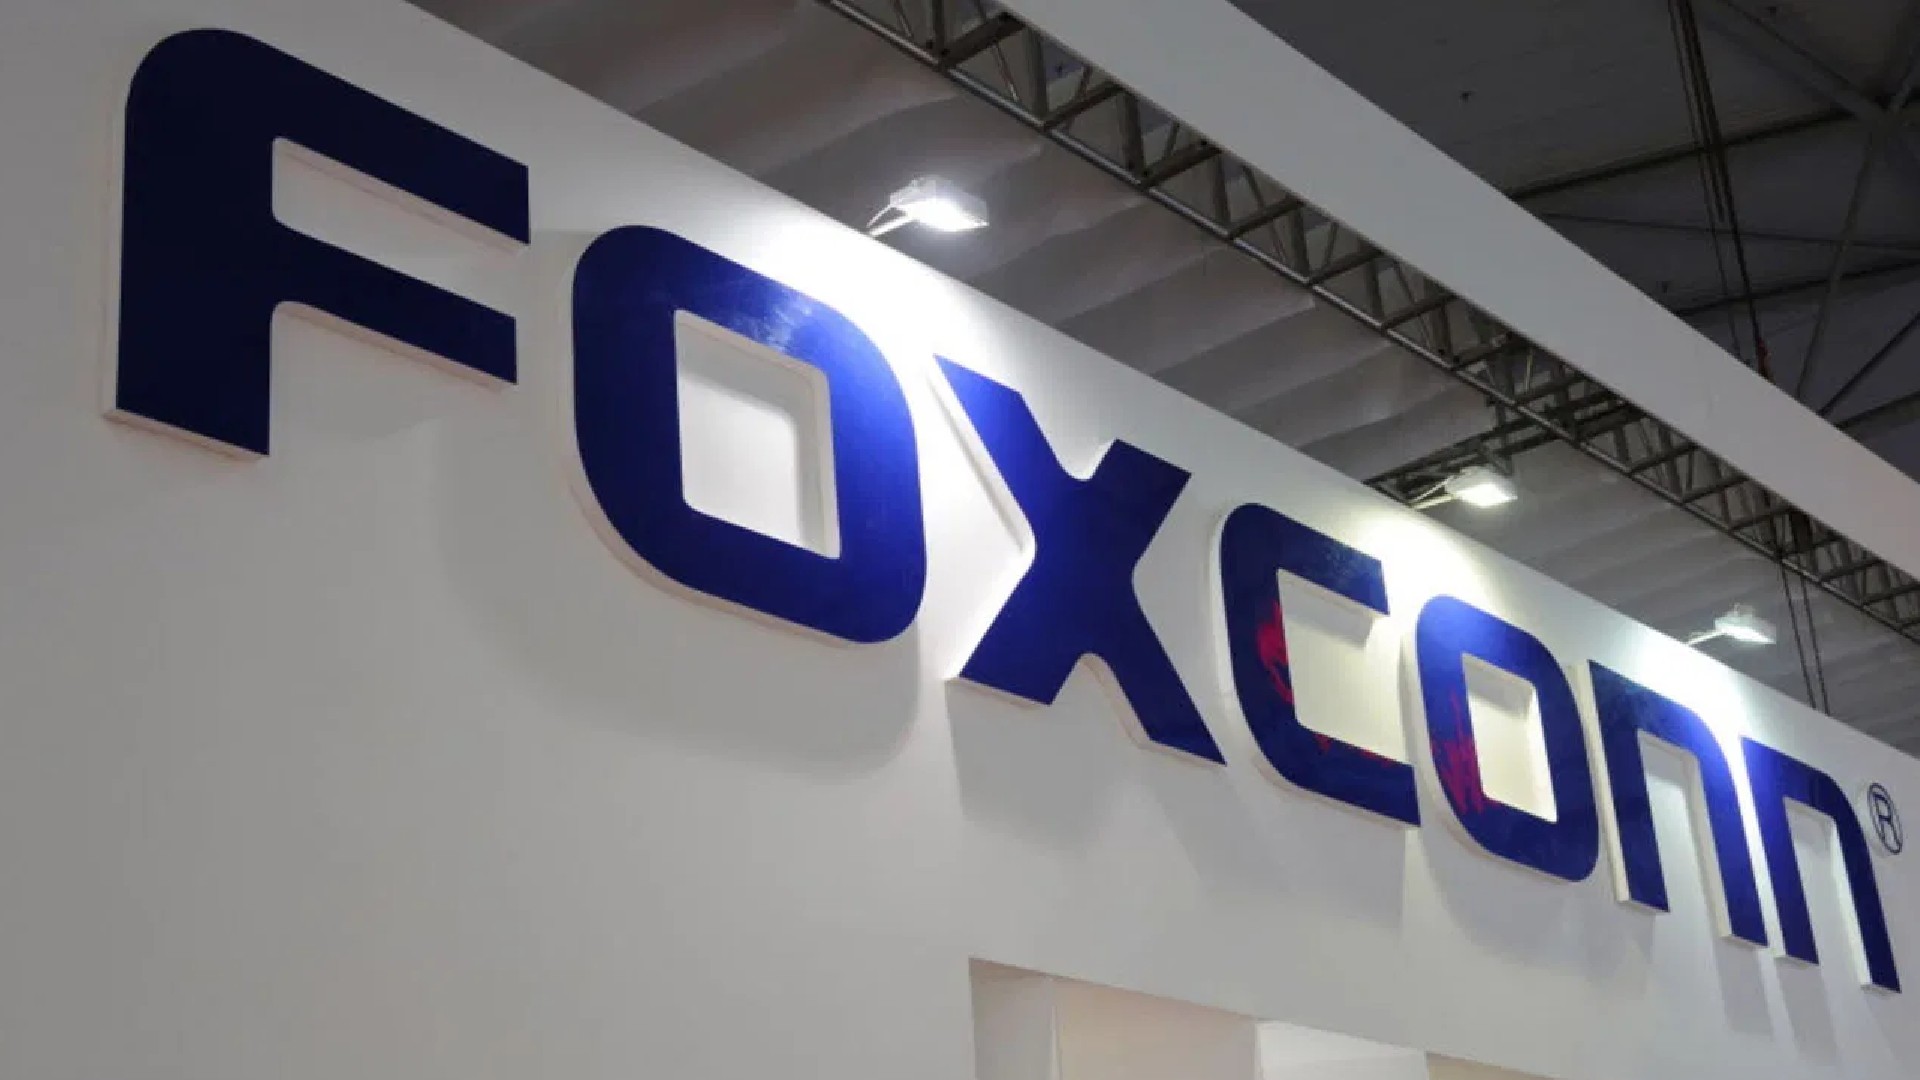 Covid19 Hits IPhone Production In India; Output Drops By 50% At Foxconn Factory